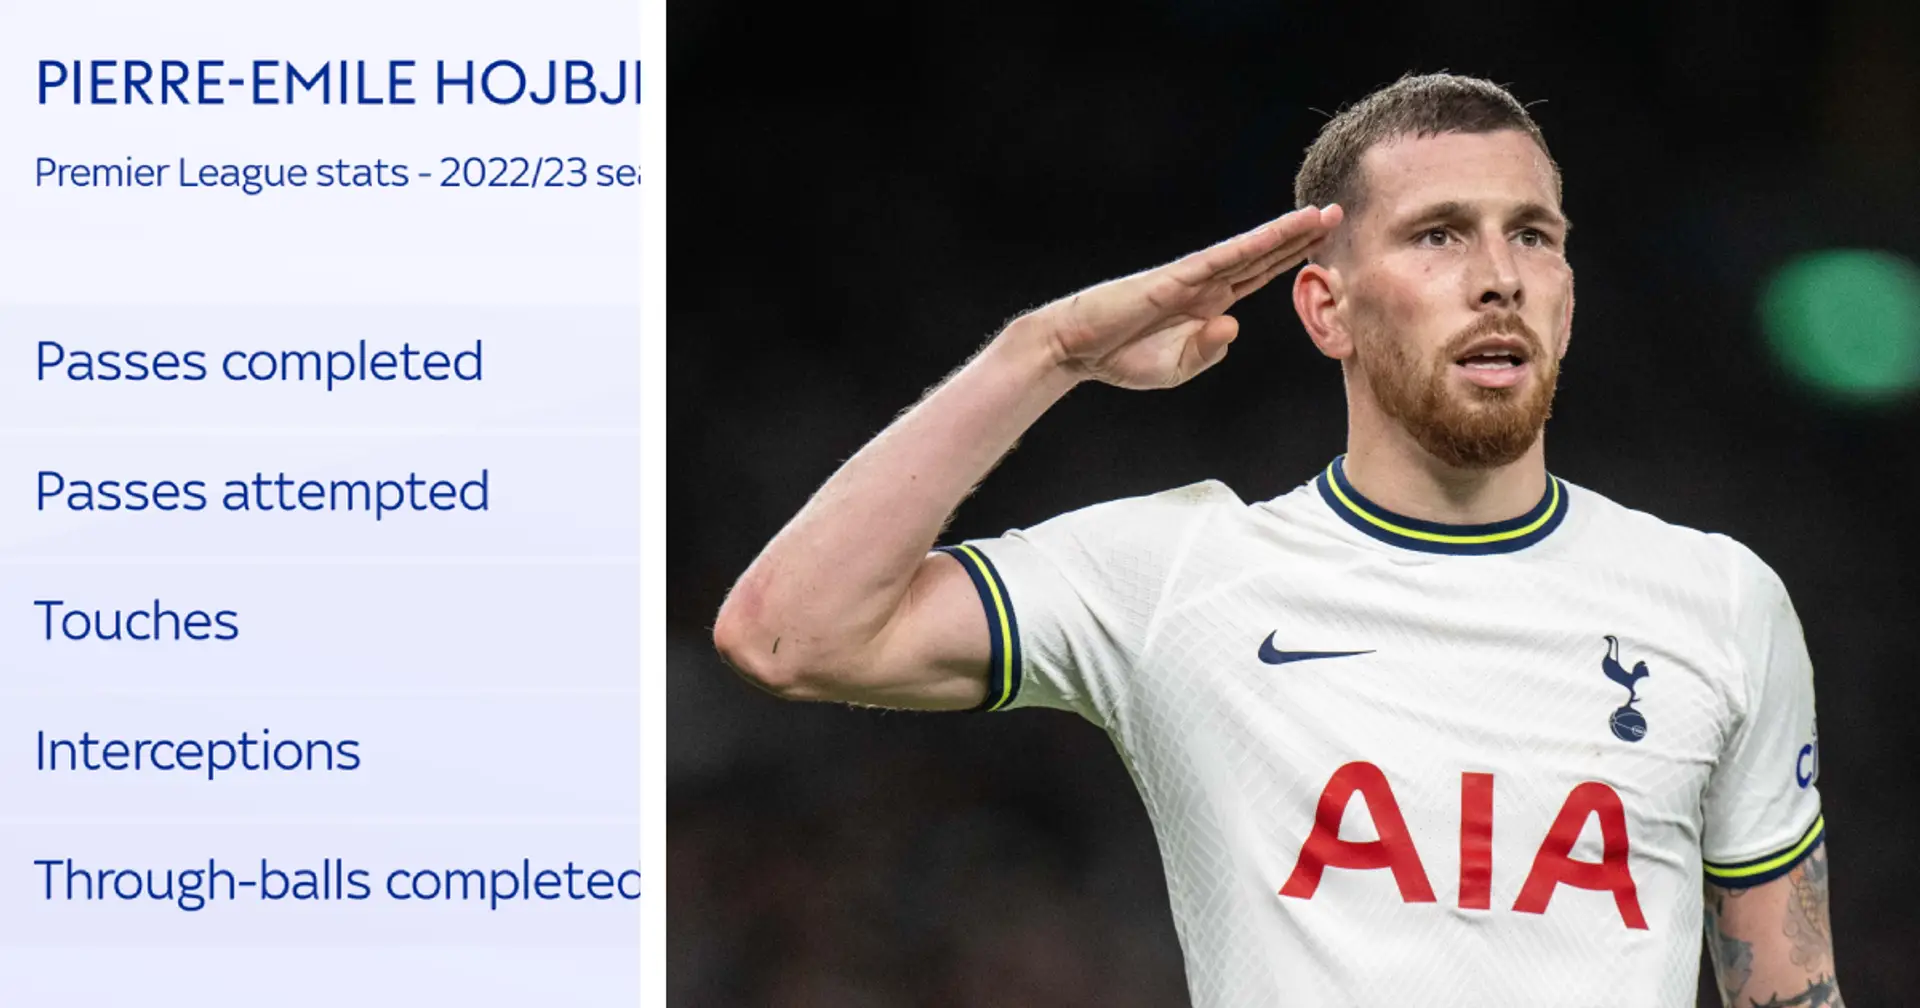 What kind of player are Man United getting in Pierre-Emile Hojbjerg? Stats suggest he excels in one key area